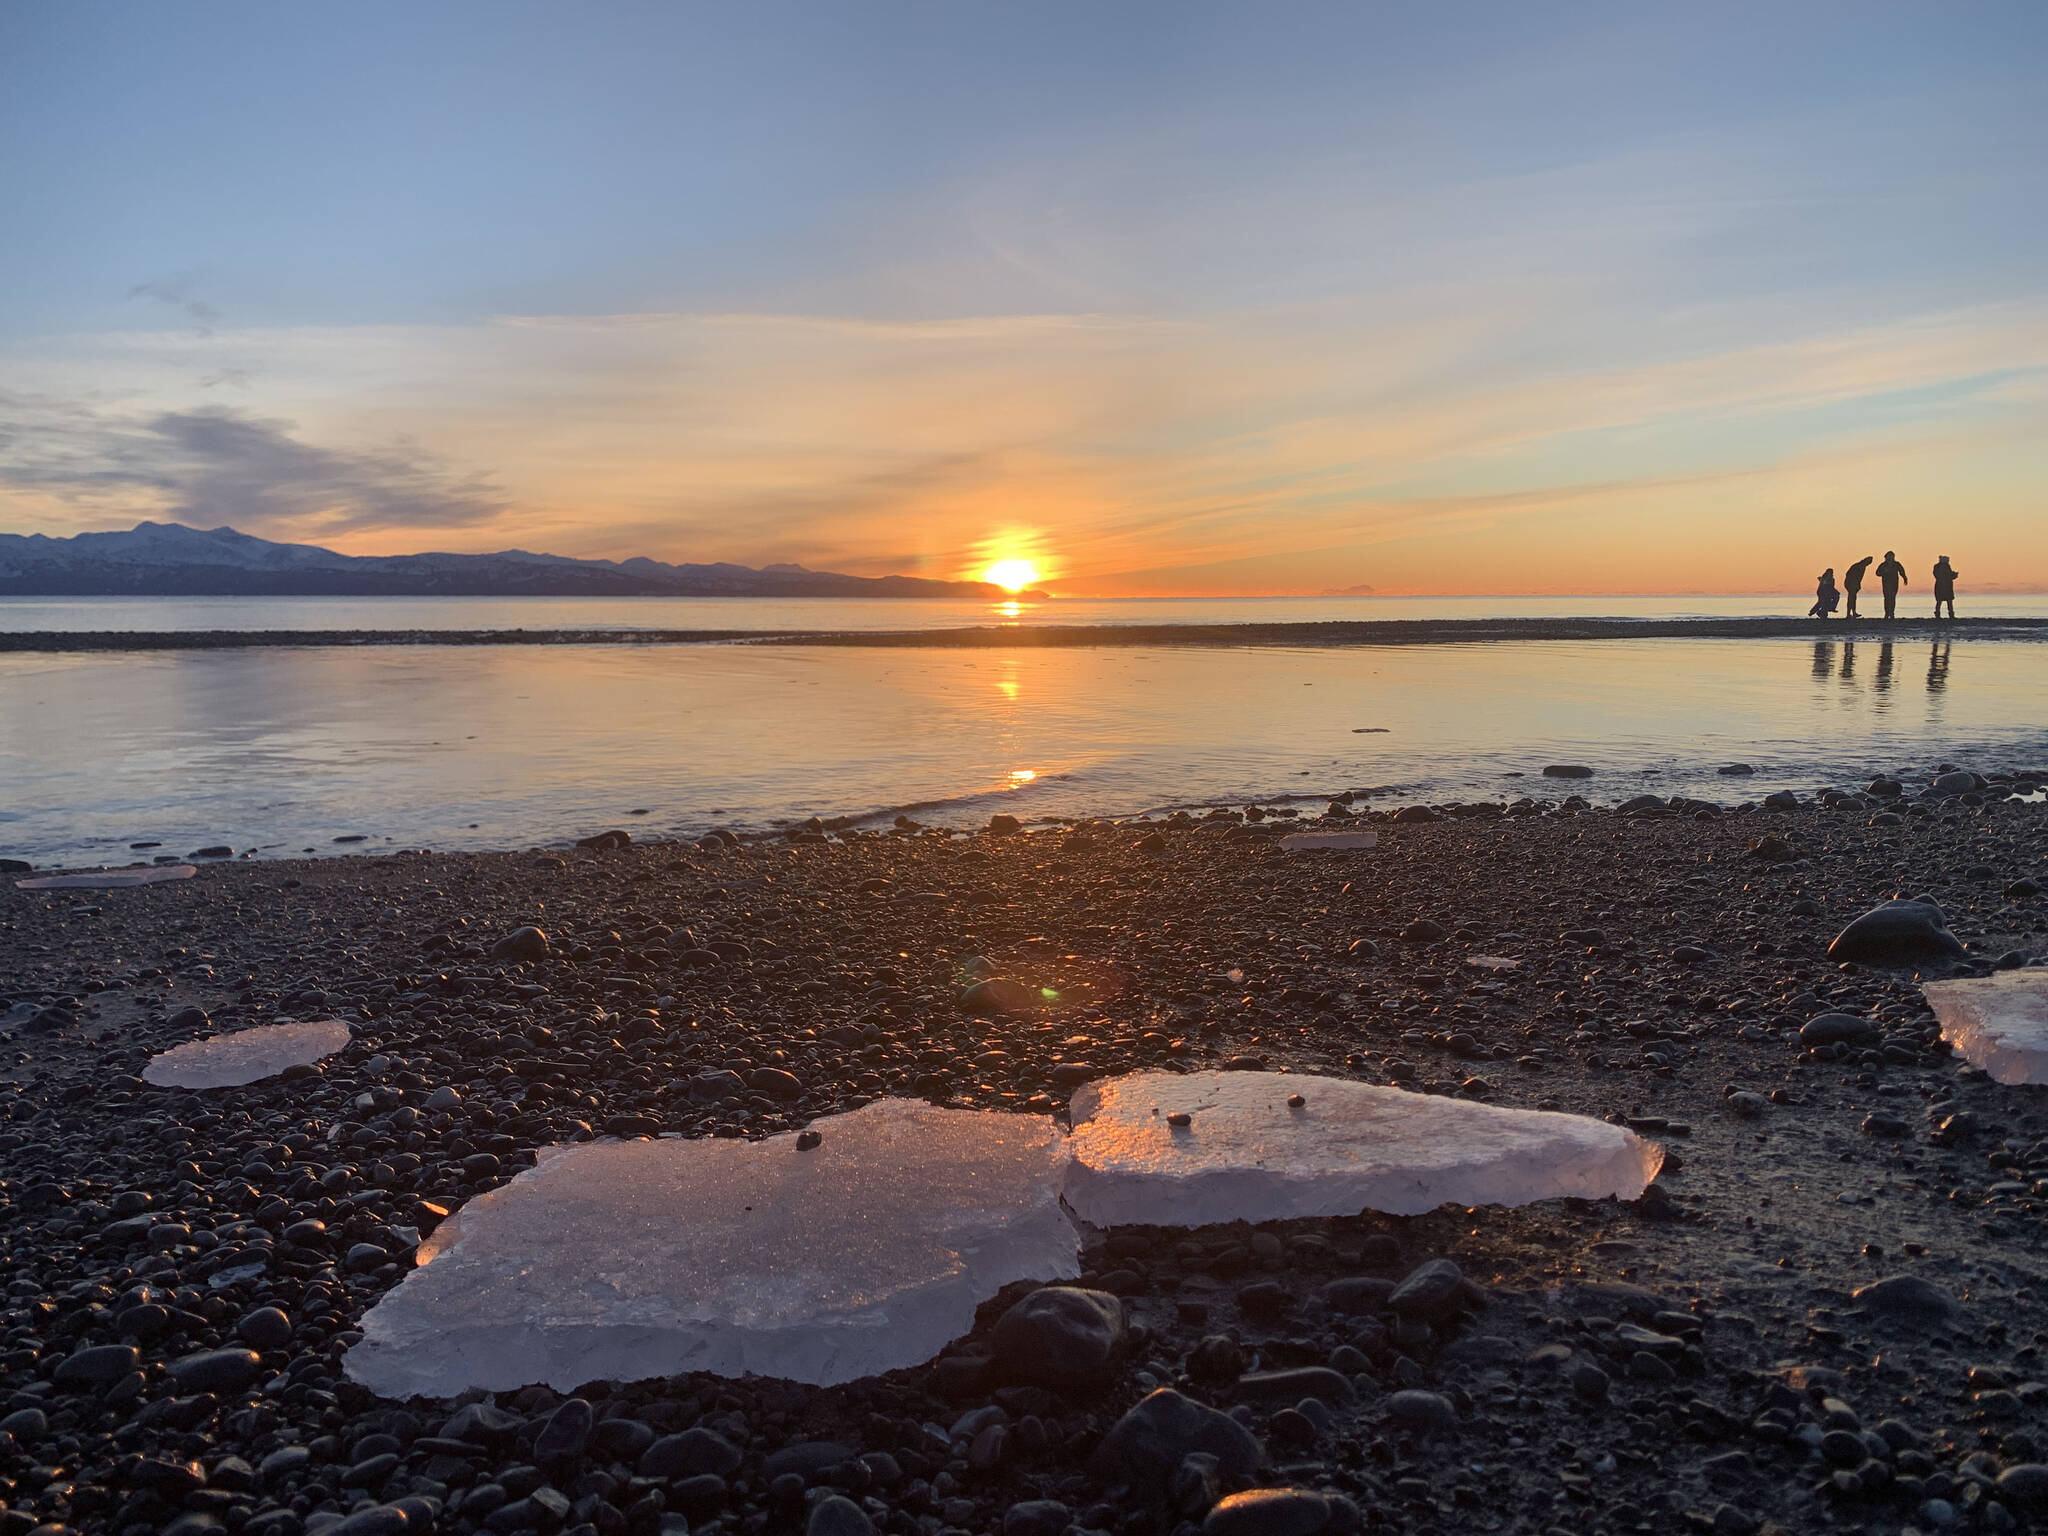 A recent sunset view from Mariner Park Beach (Photo by Christina Whiting/Homer News)